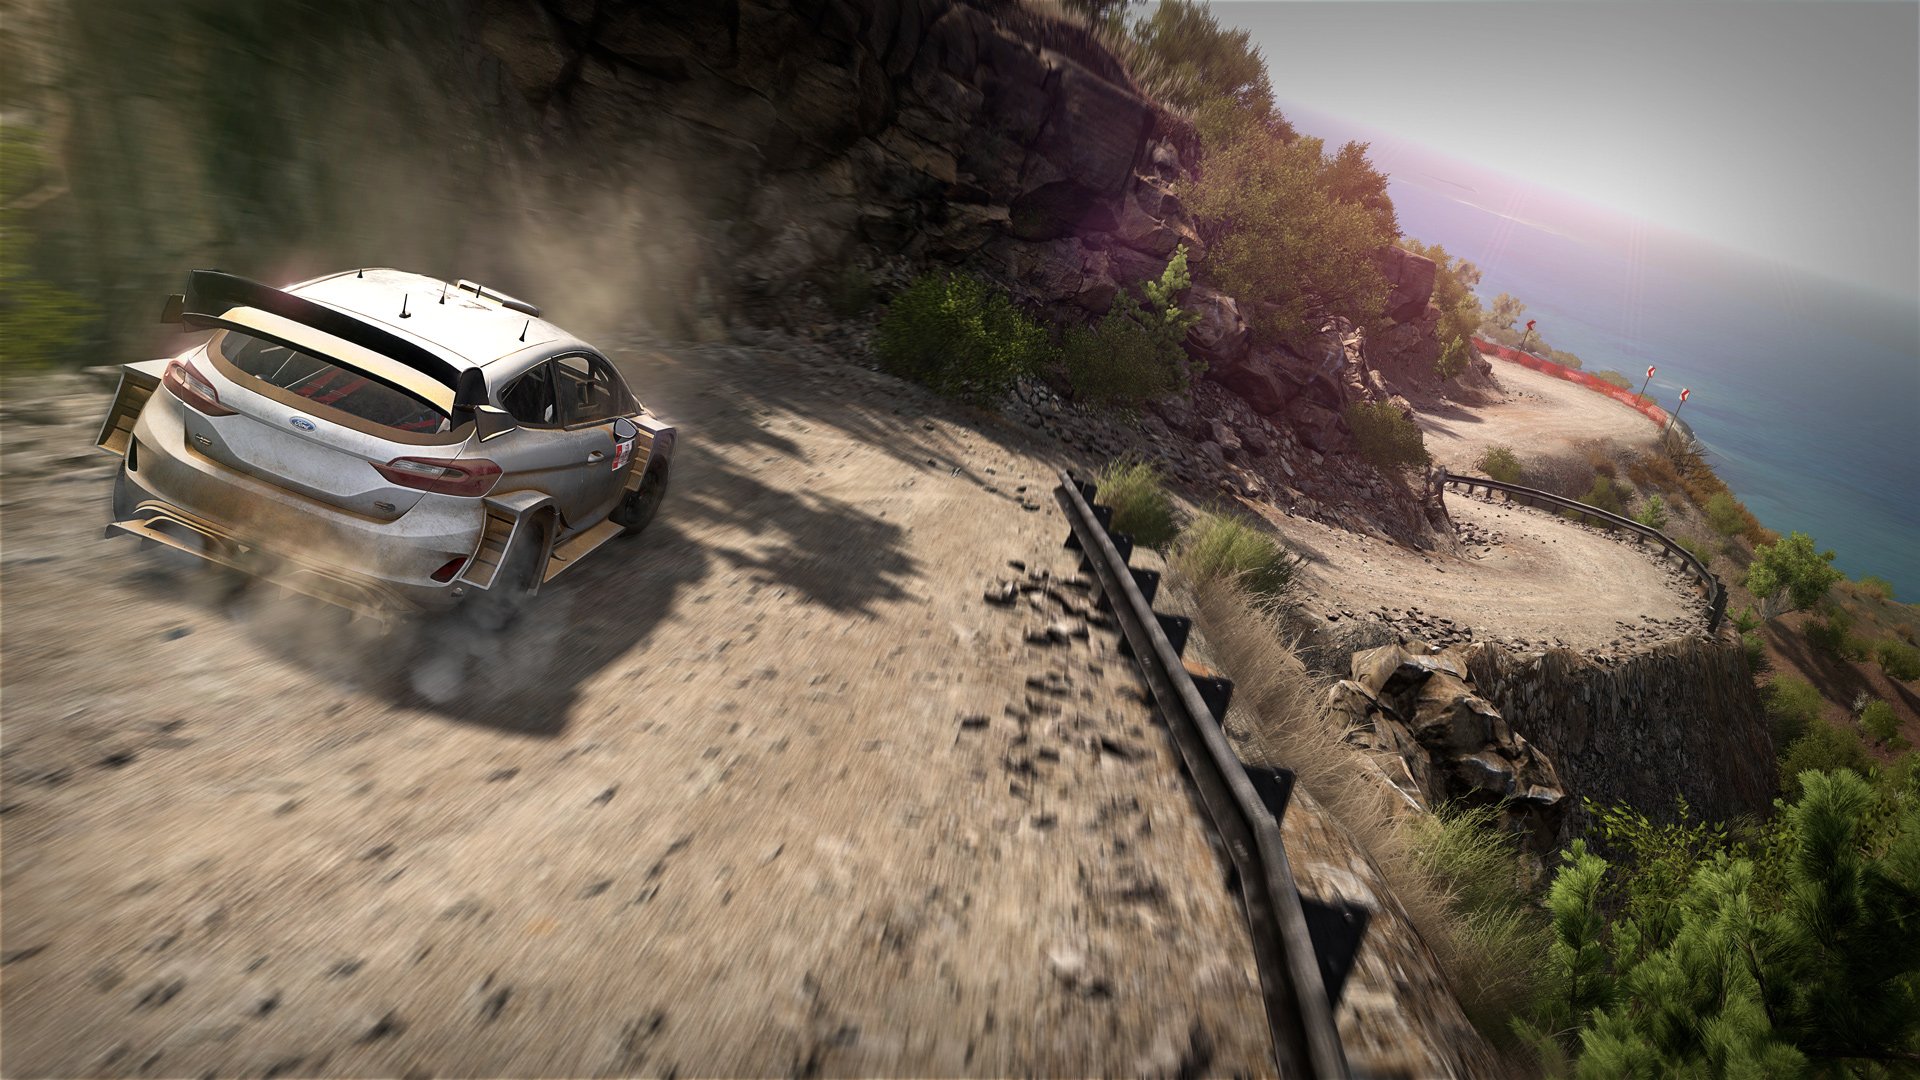 More information about "WRC 8 FIA World Rally Championship by Bigben Interactive"